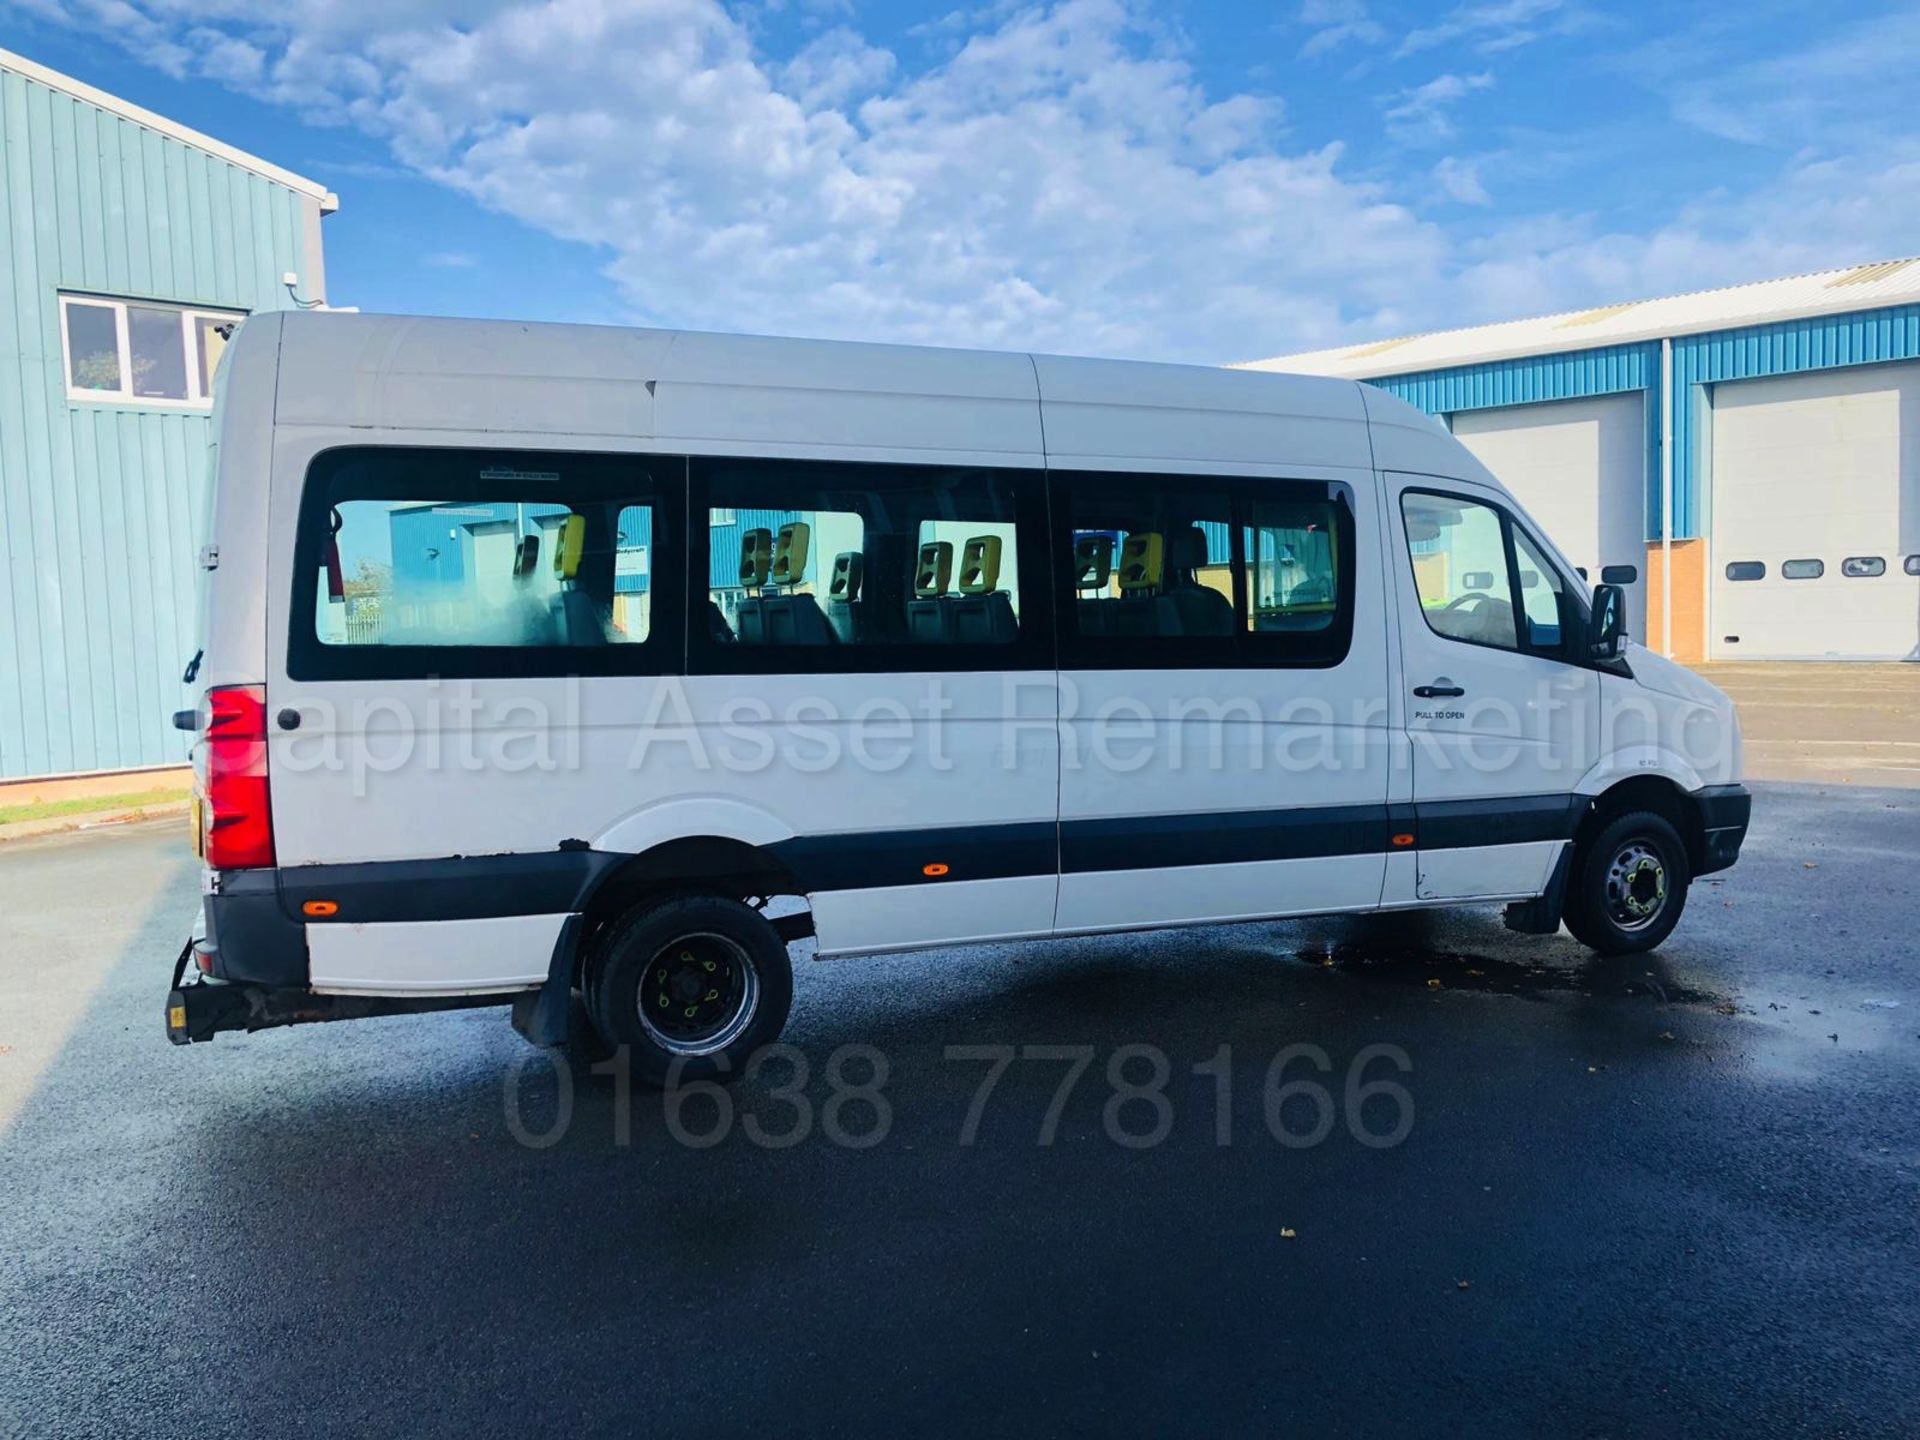 VOLKSWAGEN CRAFTER 2.5 TDI *LWB - 16 SEATER MINI-BUS / COACH* (2007) *ELECTRIC WHEEL CHAIR LIFT* - Image 17 of 38